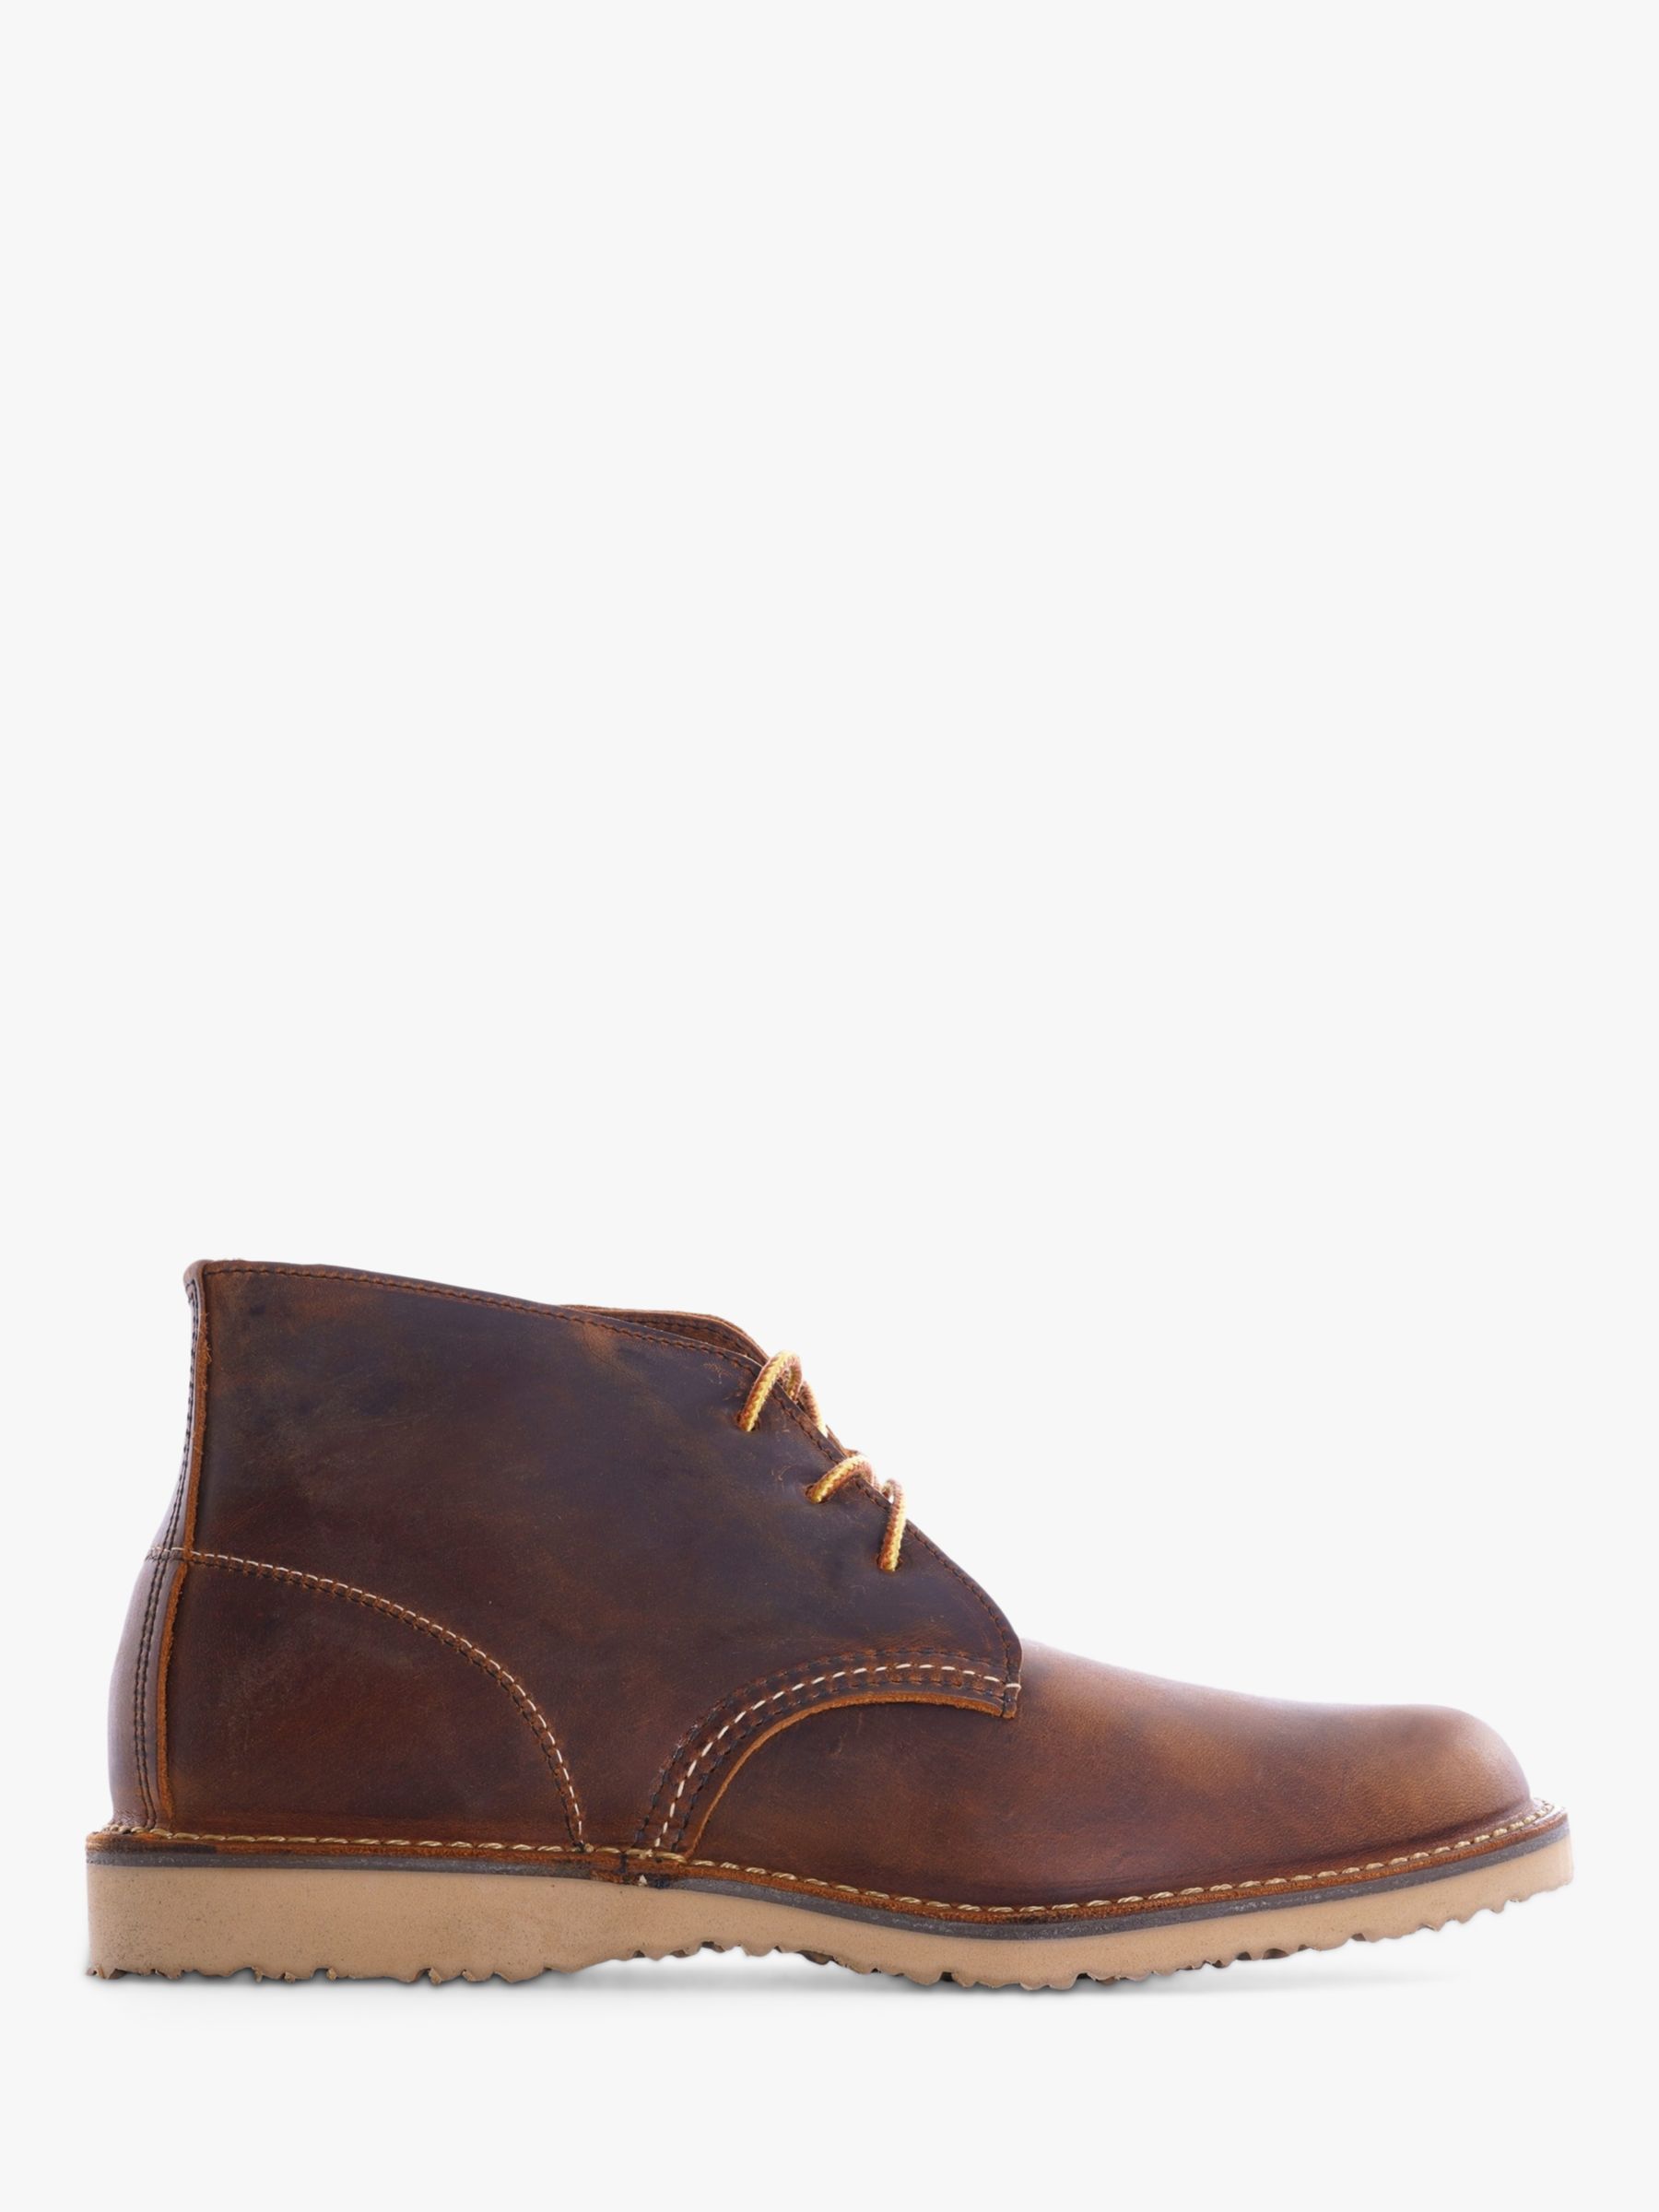 Red Wing Weekender 3322 Chukka Boots, Copper at John Lewis & Partners